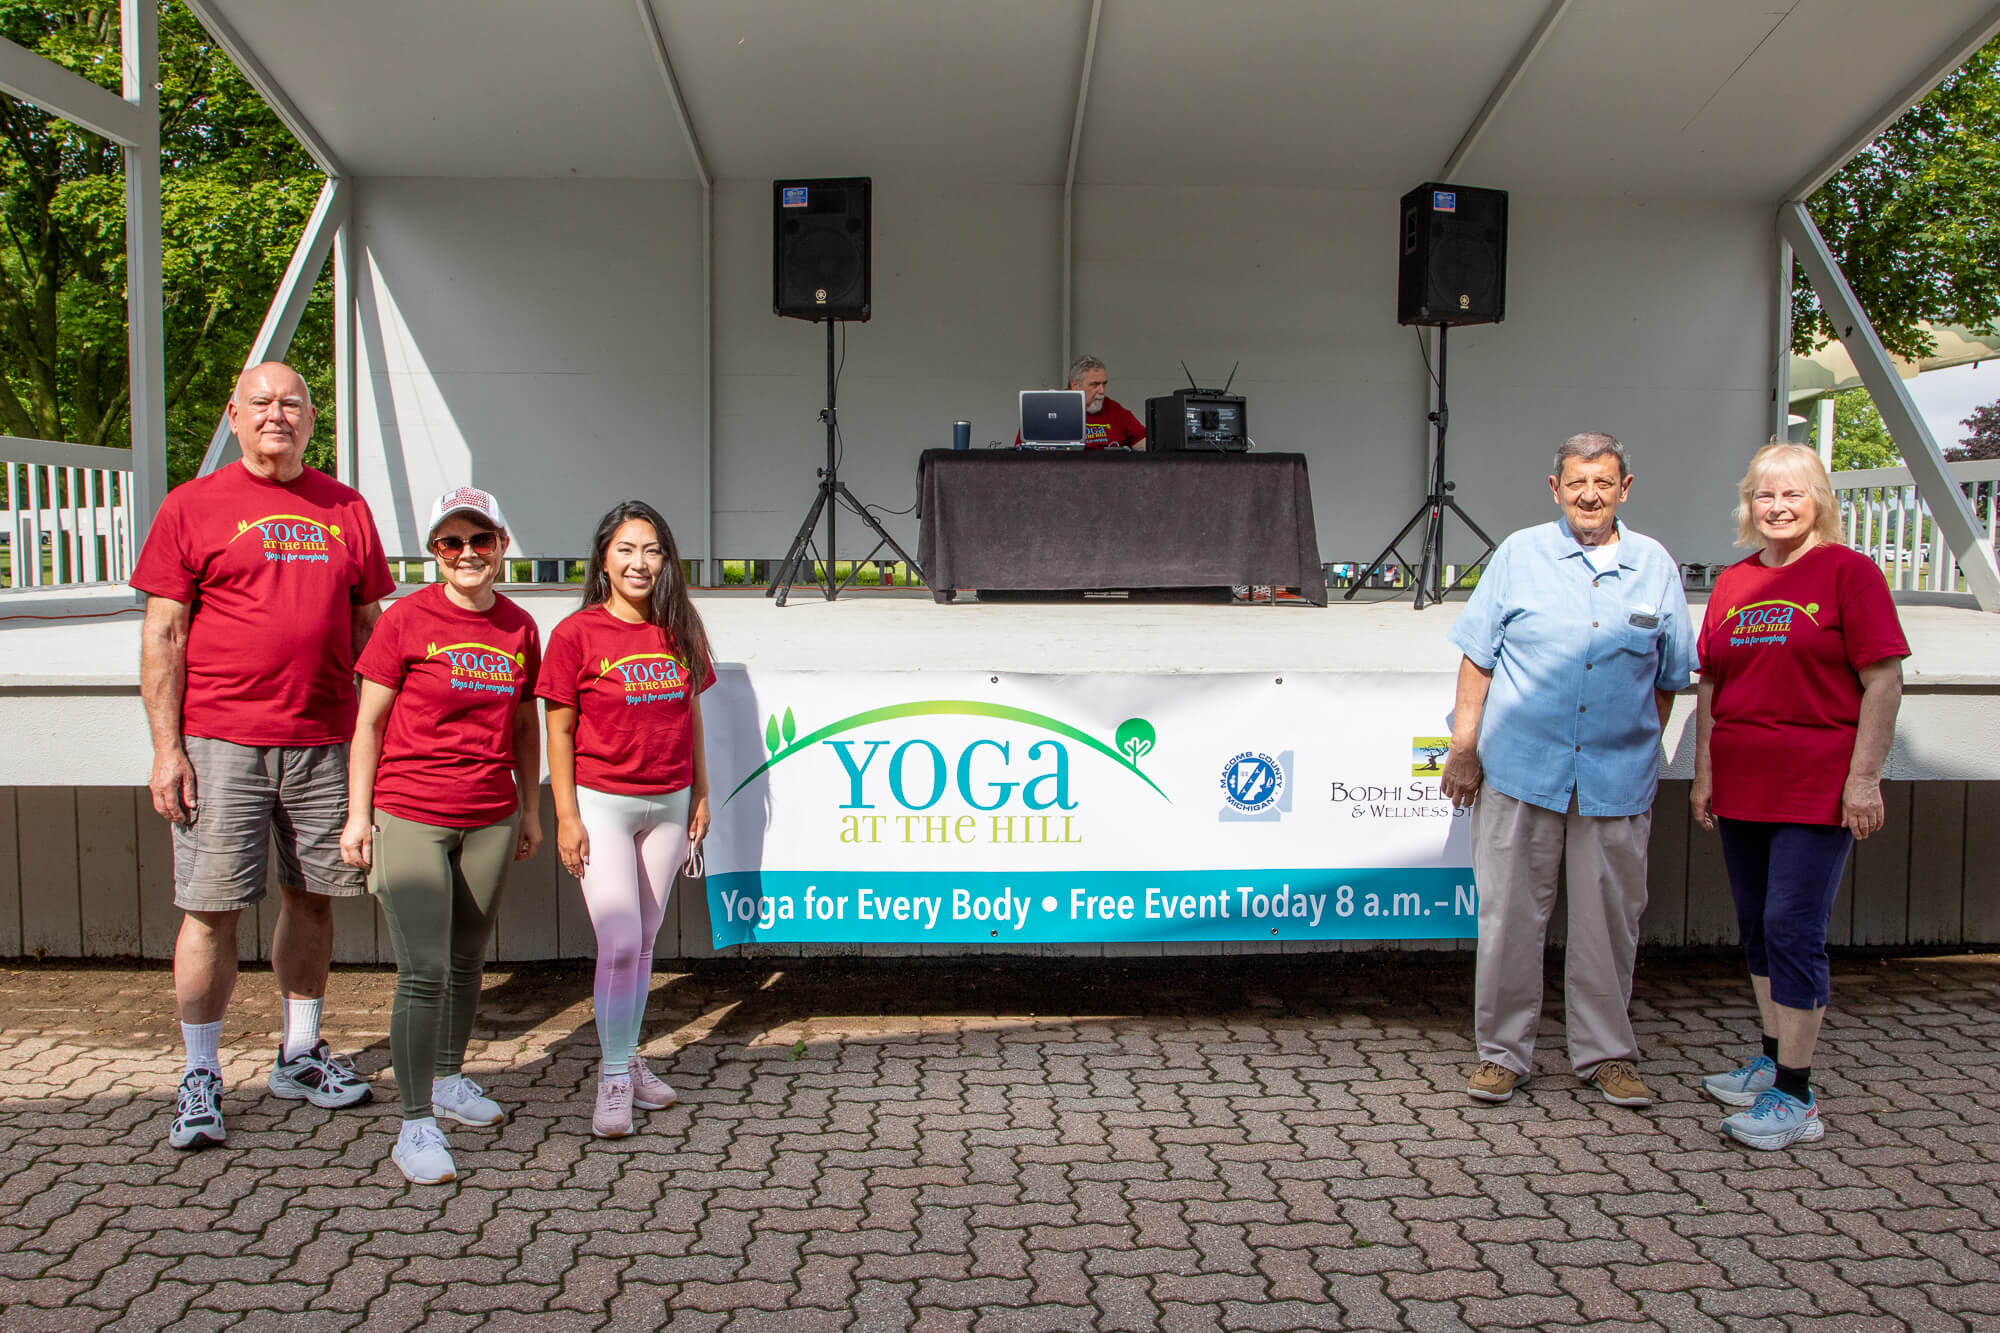 Macomb County Commissioners at the 8th Annual Yoga at the Hill event